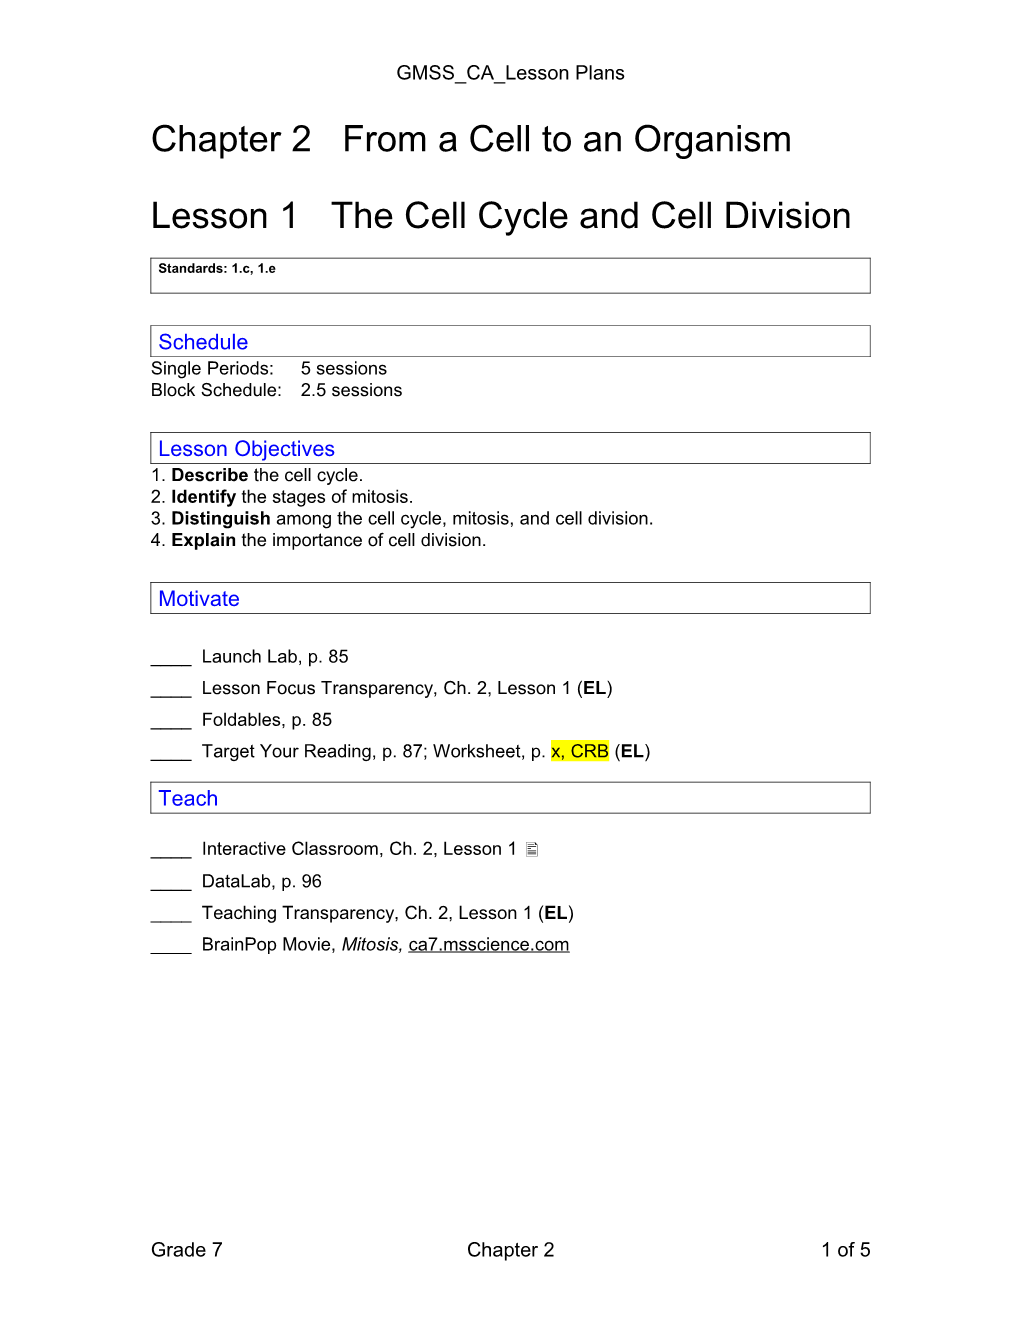 Chapter 2 from a Cell to an Organism